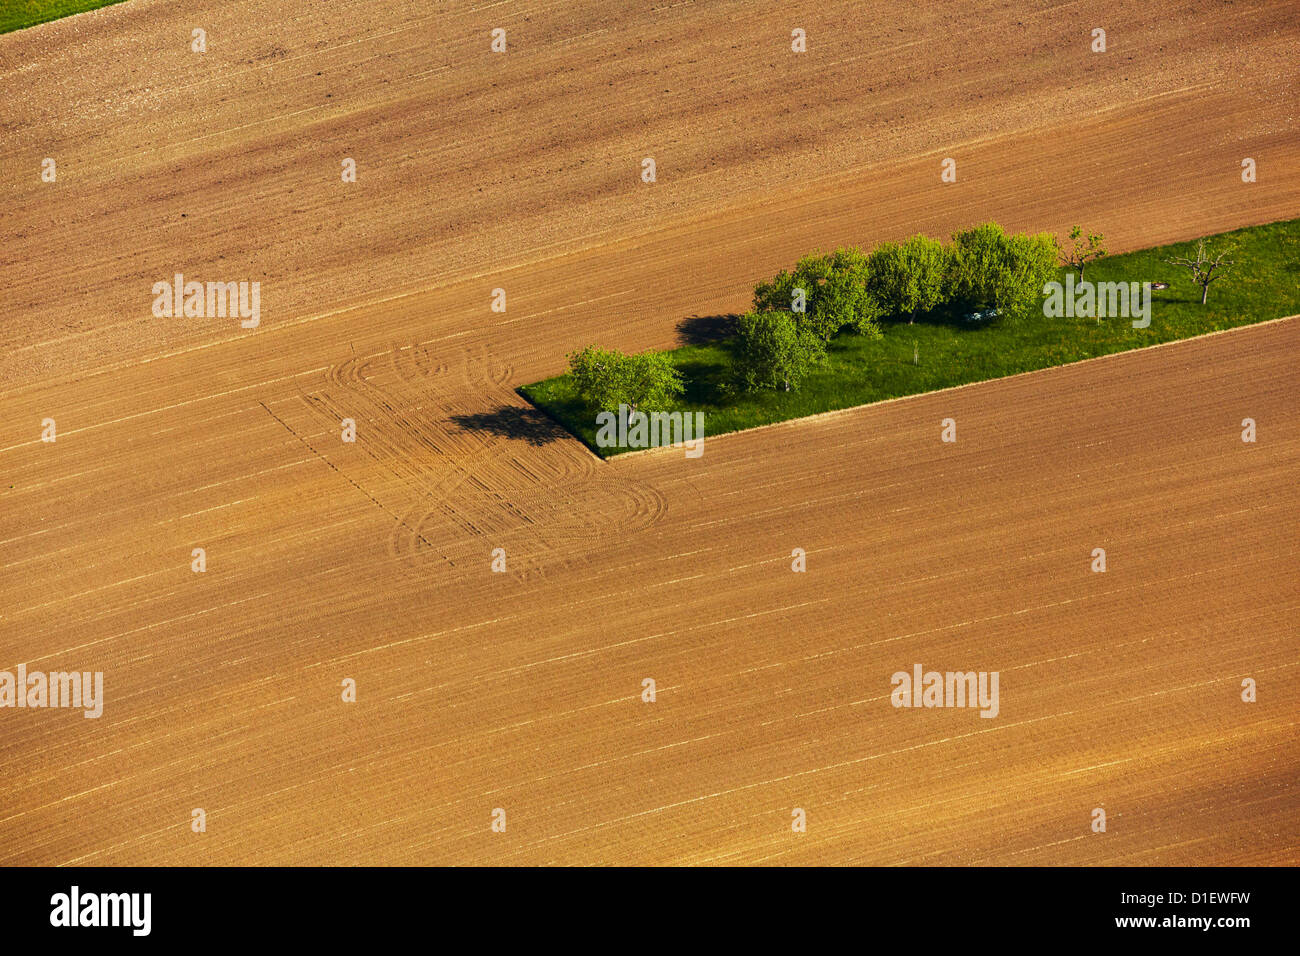 Plowed field with green area, aerial photo Stock Photo